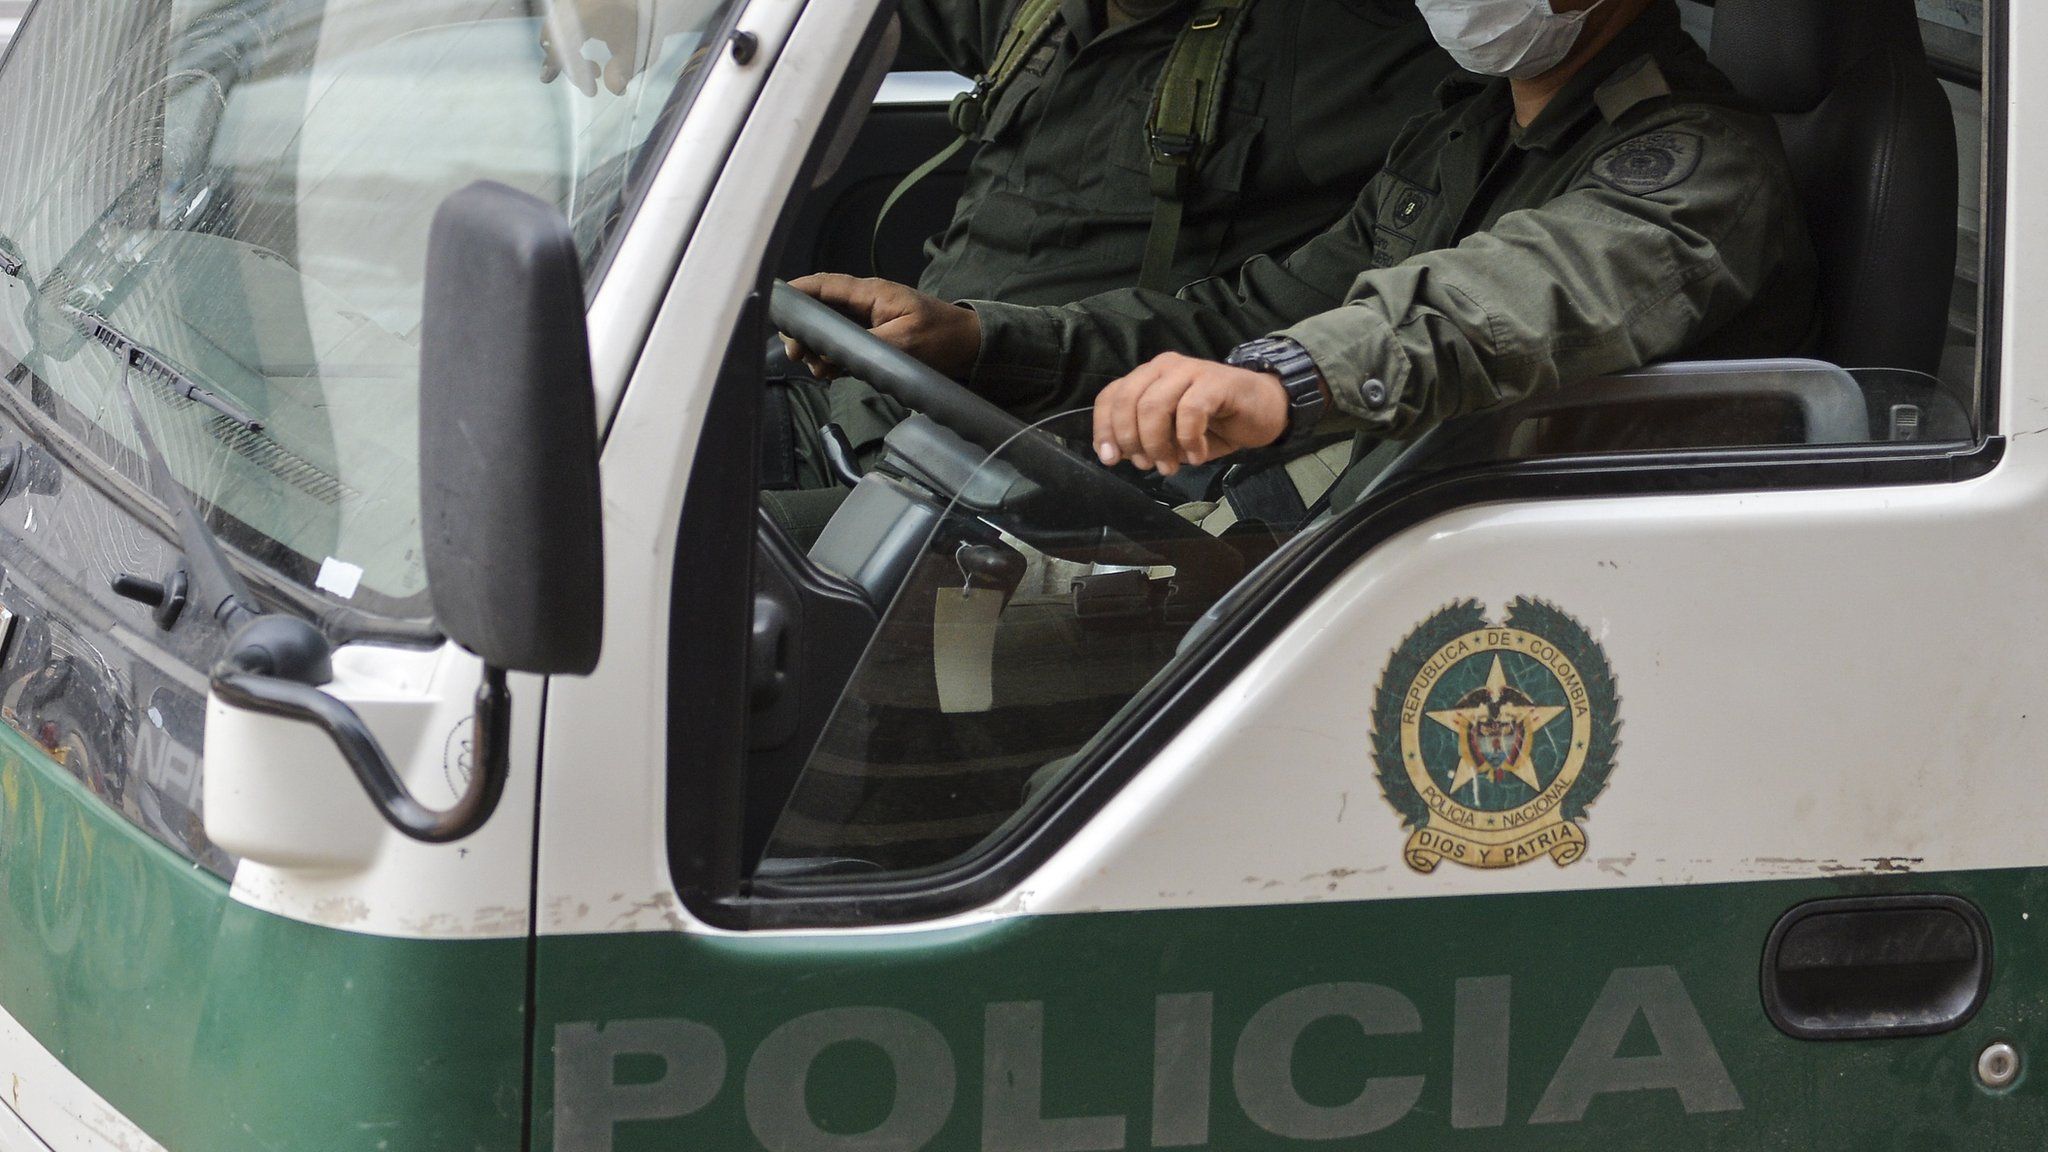 File image of Colombian police vehicle